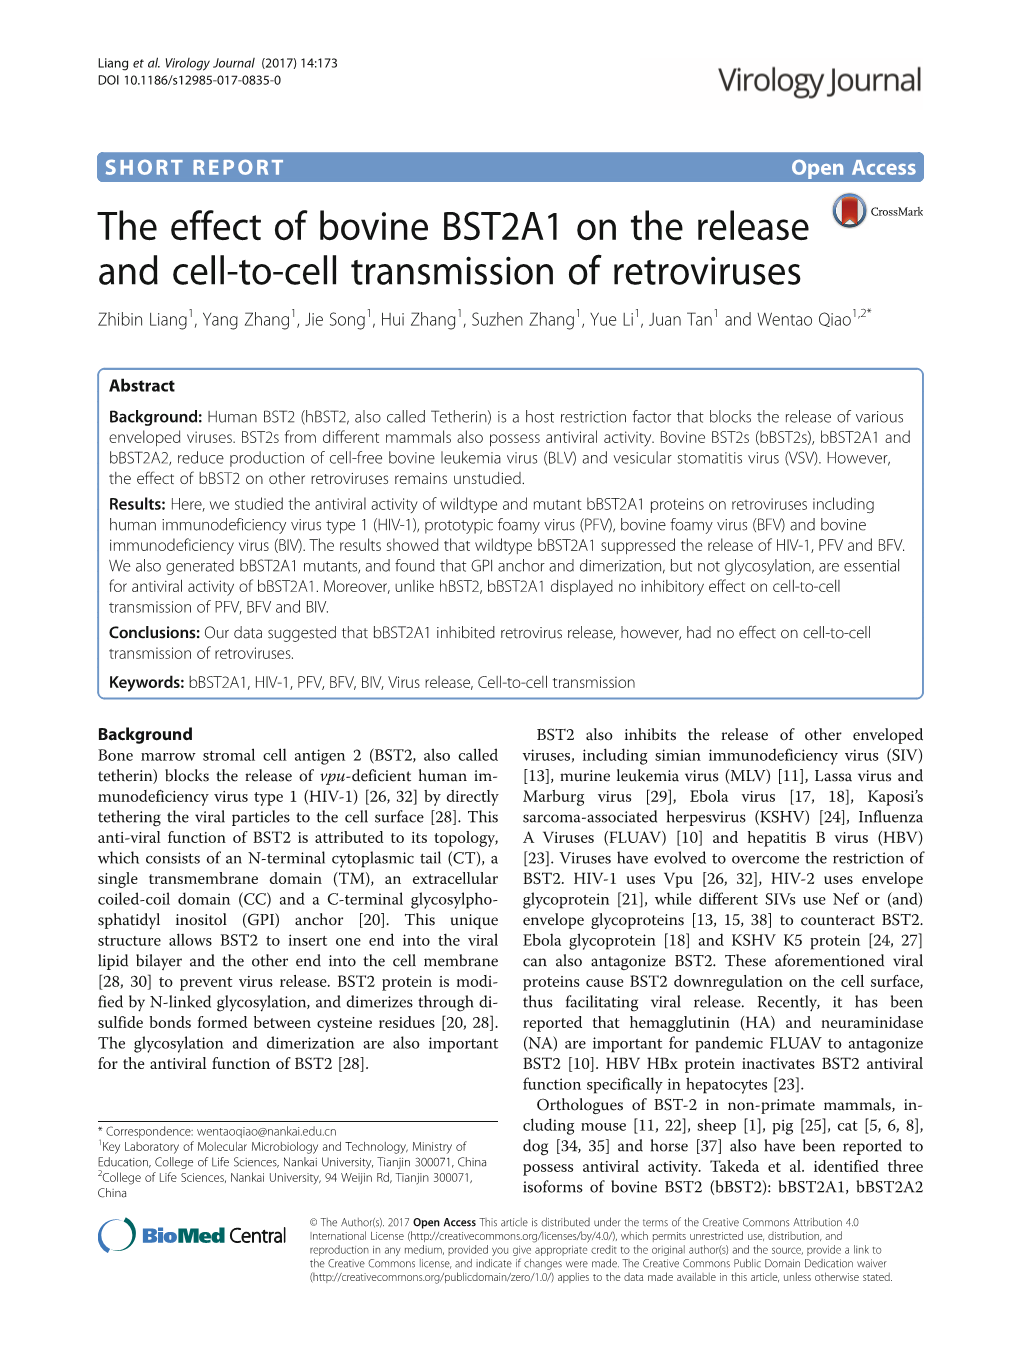 The Effect of Bovine BST2A1 on the Release and Cell-To-Cell Transmission of Retroviruses